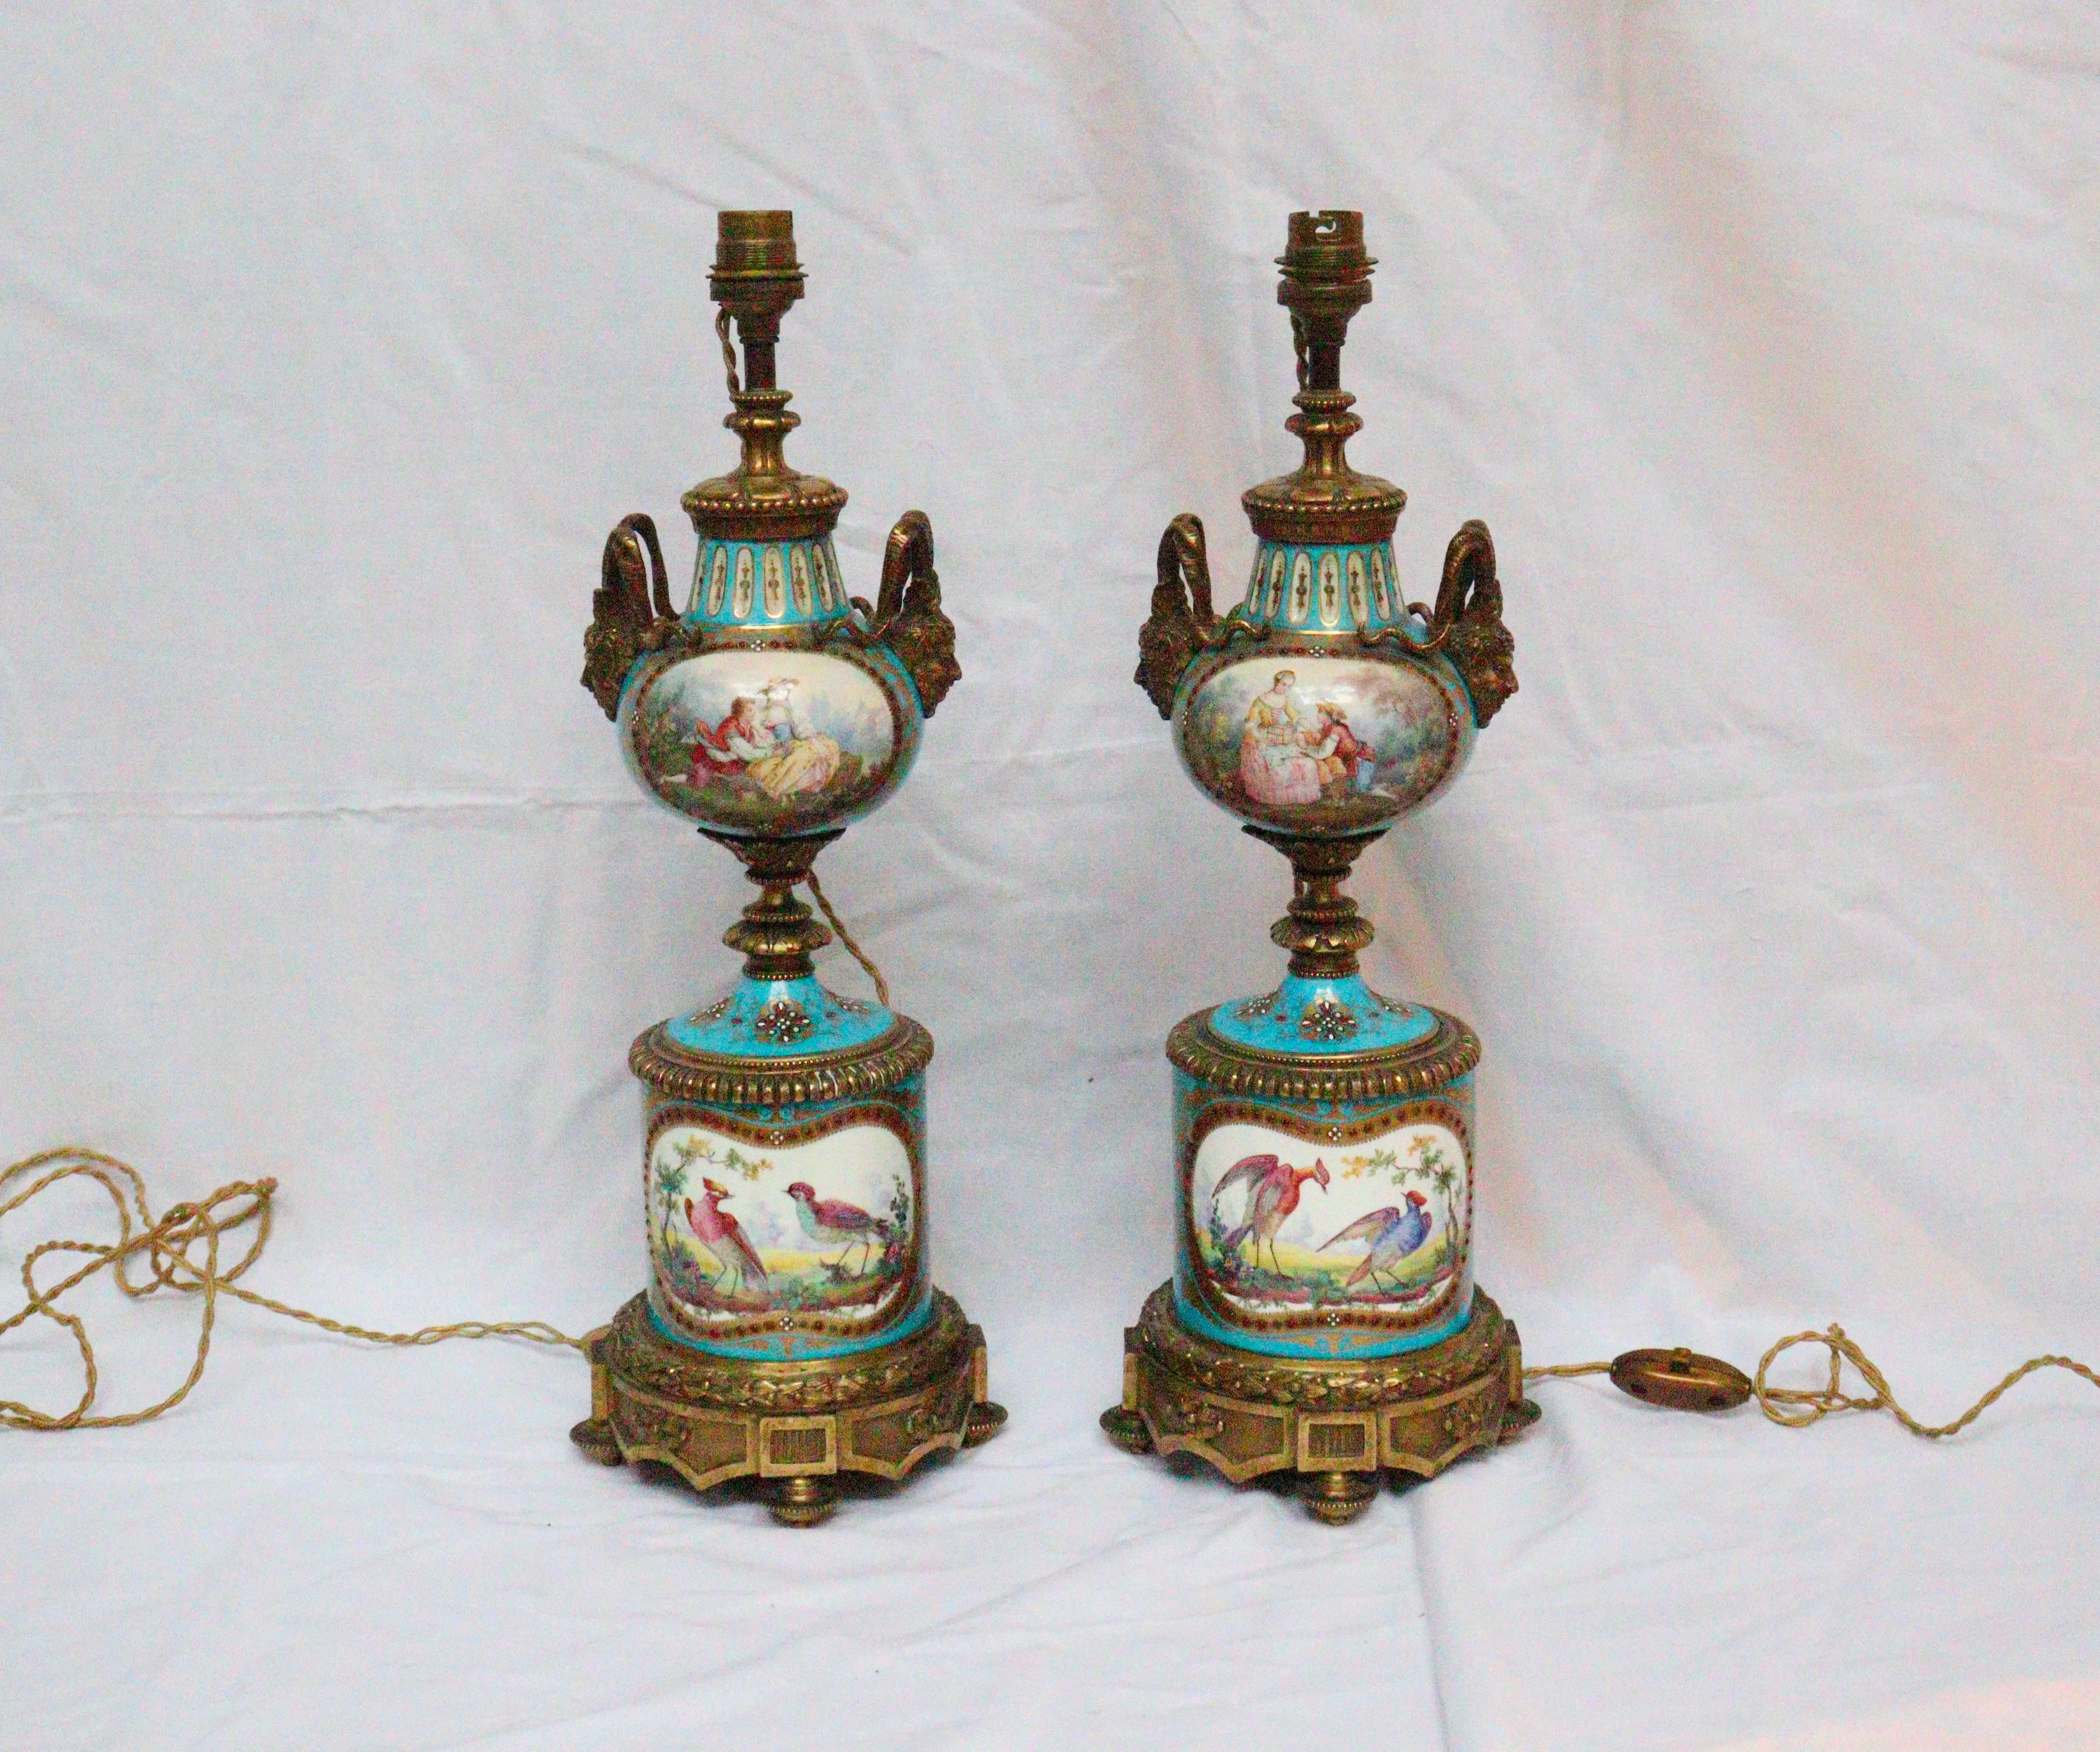 A 19th century French pair of celeste blue ground Sèvres Porcelain vases,
having pearl beads and hand-painted gilt decorated and ‘jeweled’ bodies, waisted ormolu centers, with shaped cartouches depicting on one side bucolic pastoral scenes and